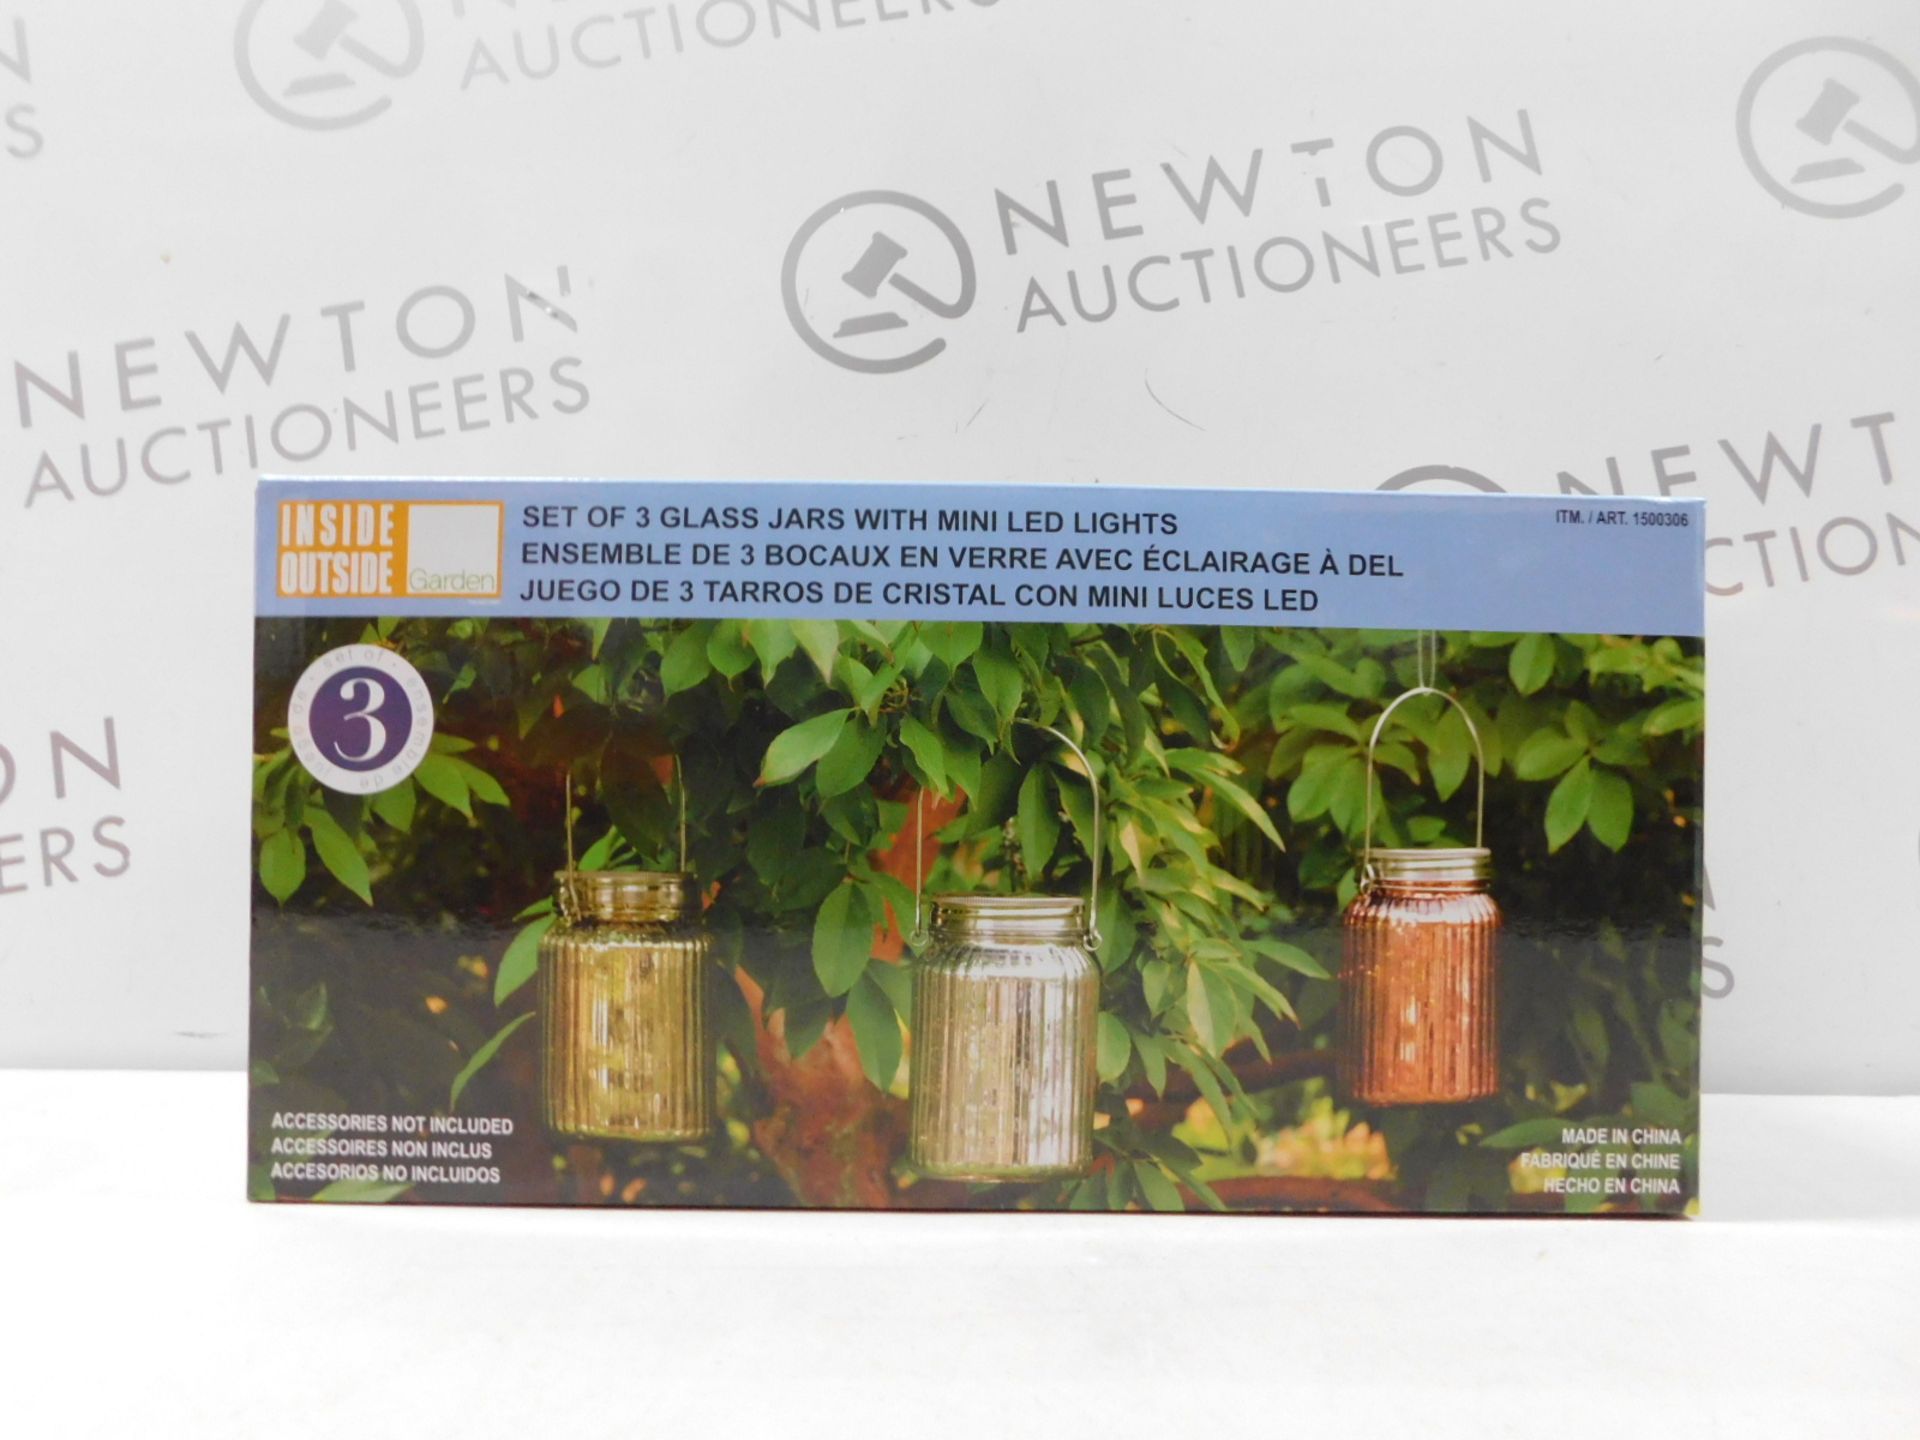 1 BOXED SET OF 3 COLORED GLASS GARDEN JARS WITH FAIRY LIGHTS RRP £39.99